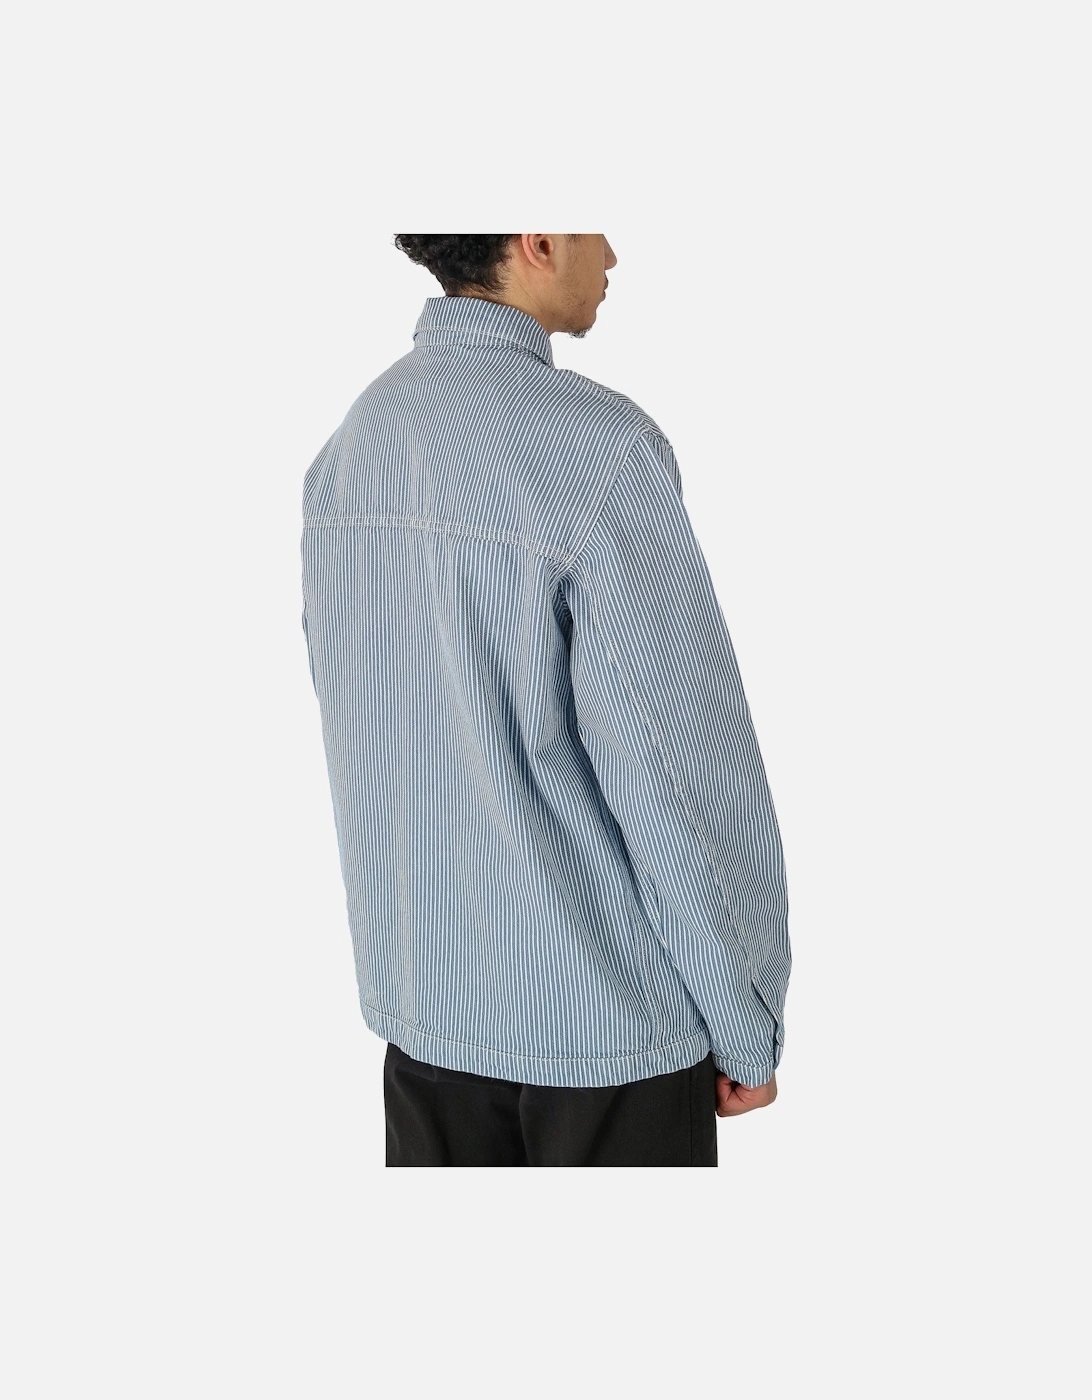 Coverall Ticking Stripe Blue Jacket